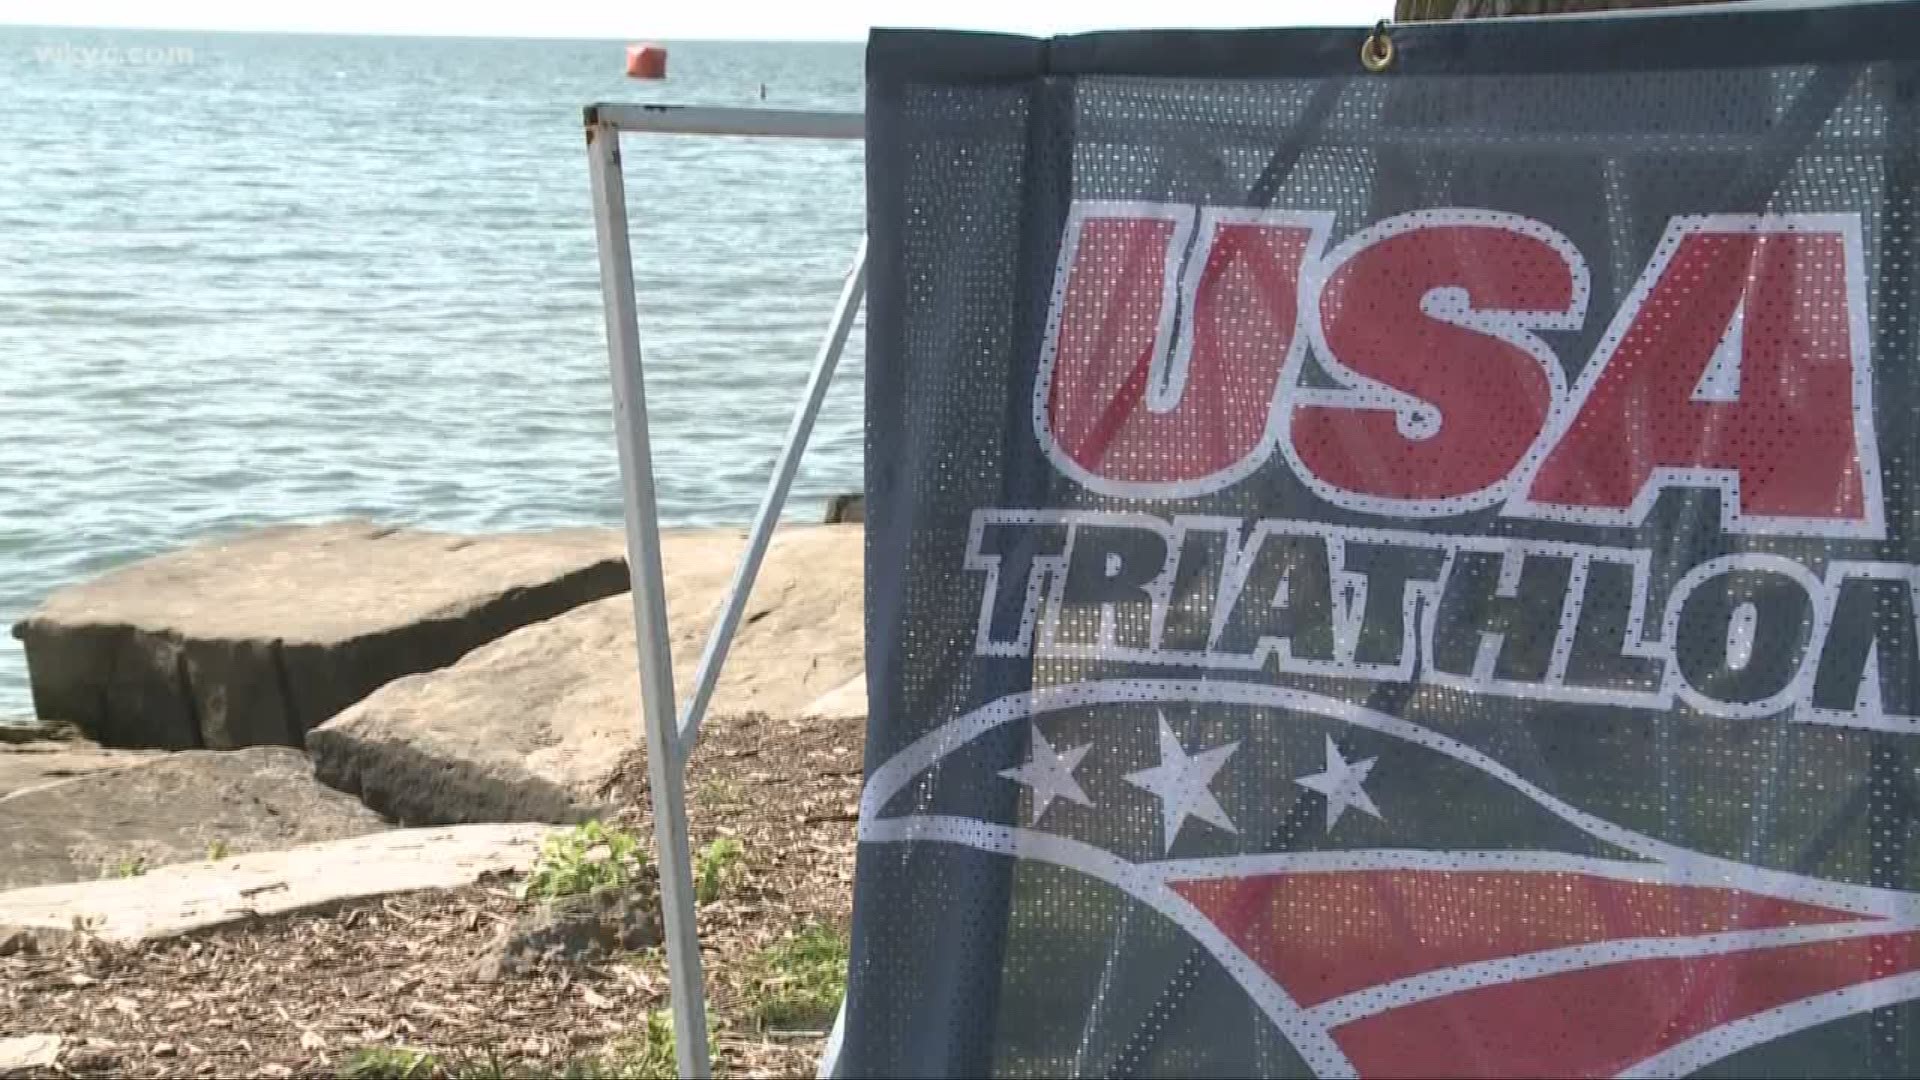 75-year-old triathlete dies after being pulled from waters of Edgewater Beach